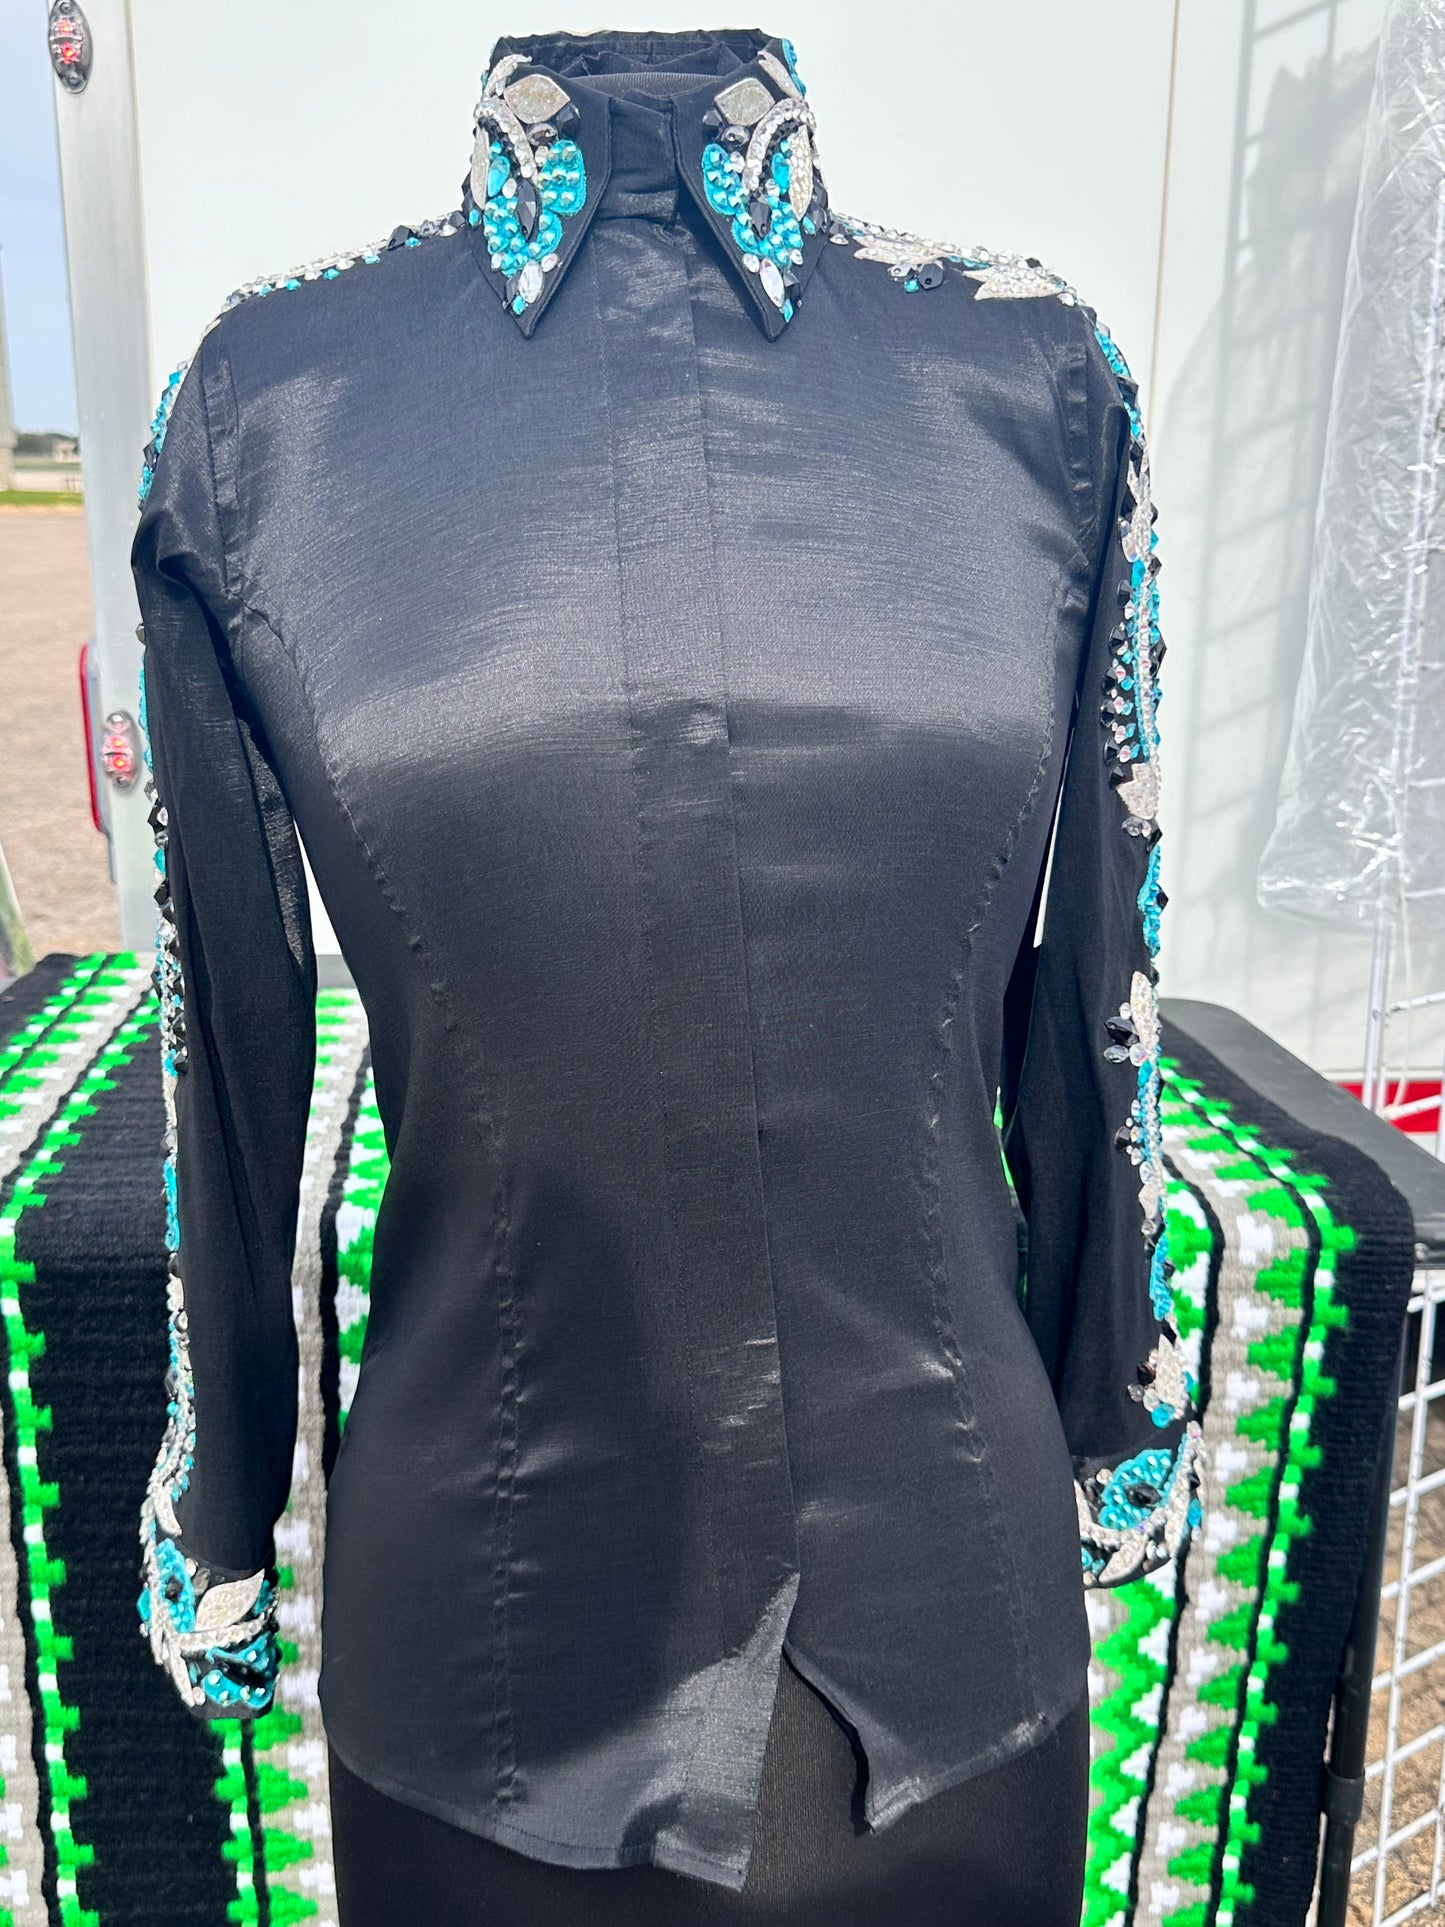 XS day shirt stretch taffeta black with silver and aqua accents